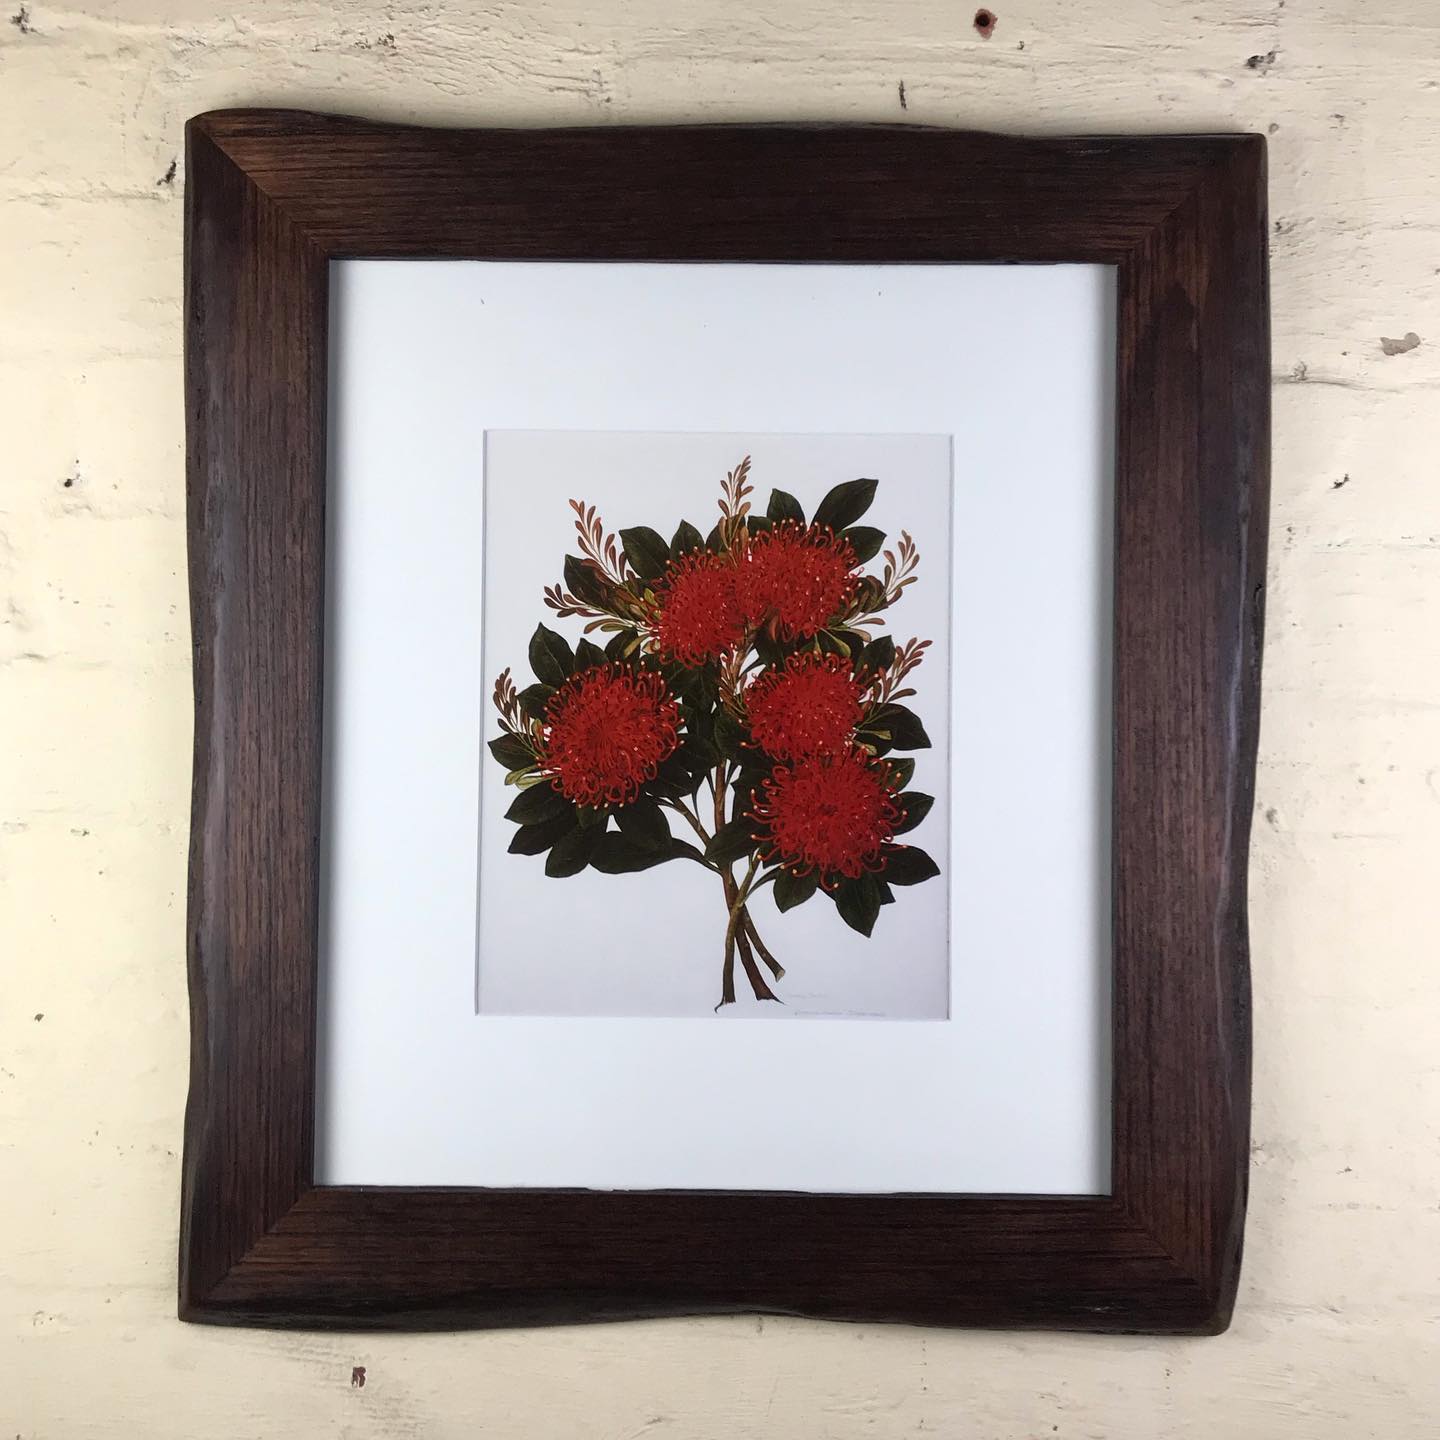 A DRIFTWOOD CHERRY WAX CUSTOM PICTURE FRAME MADE FROM UPCYCLED TIMBER AUSTRALIA